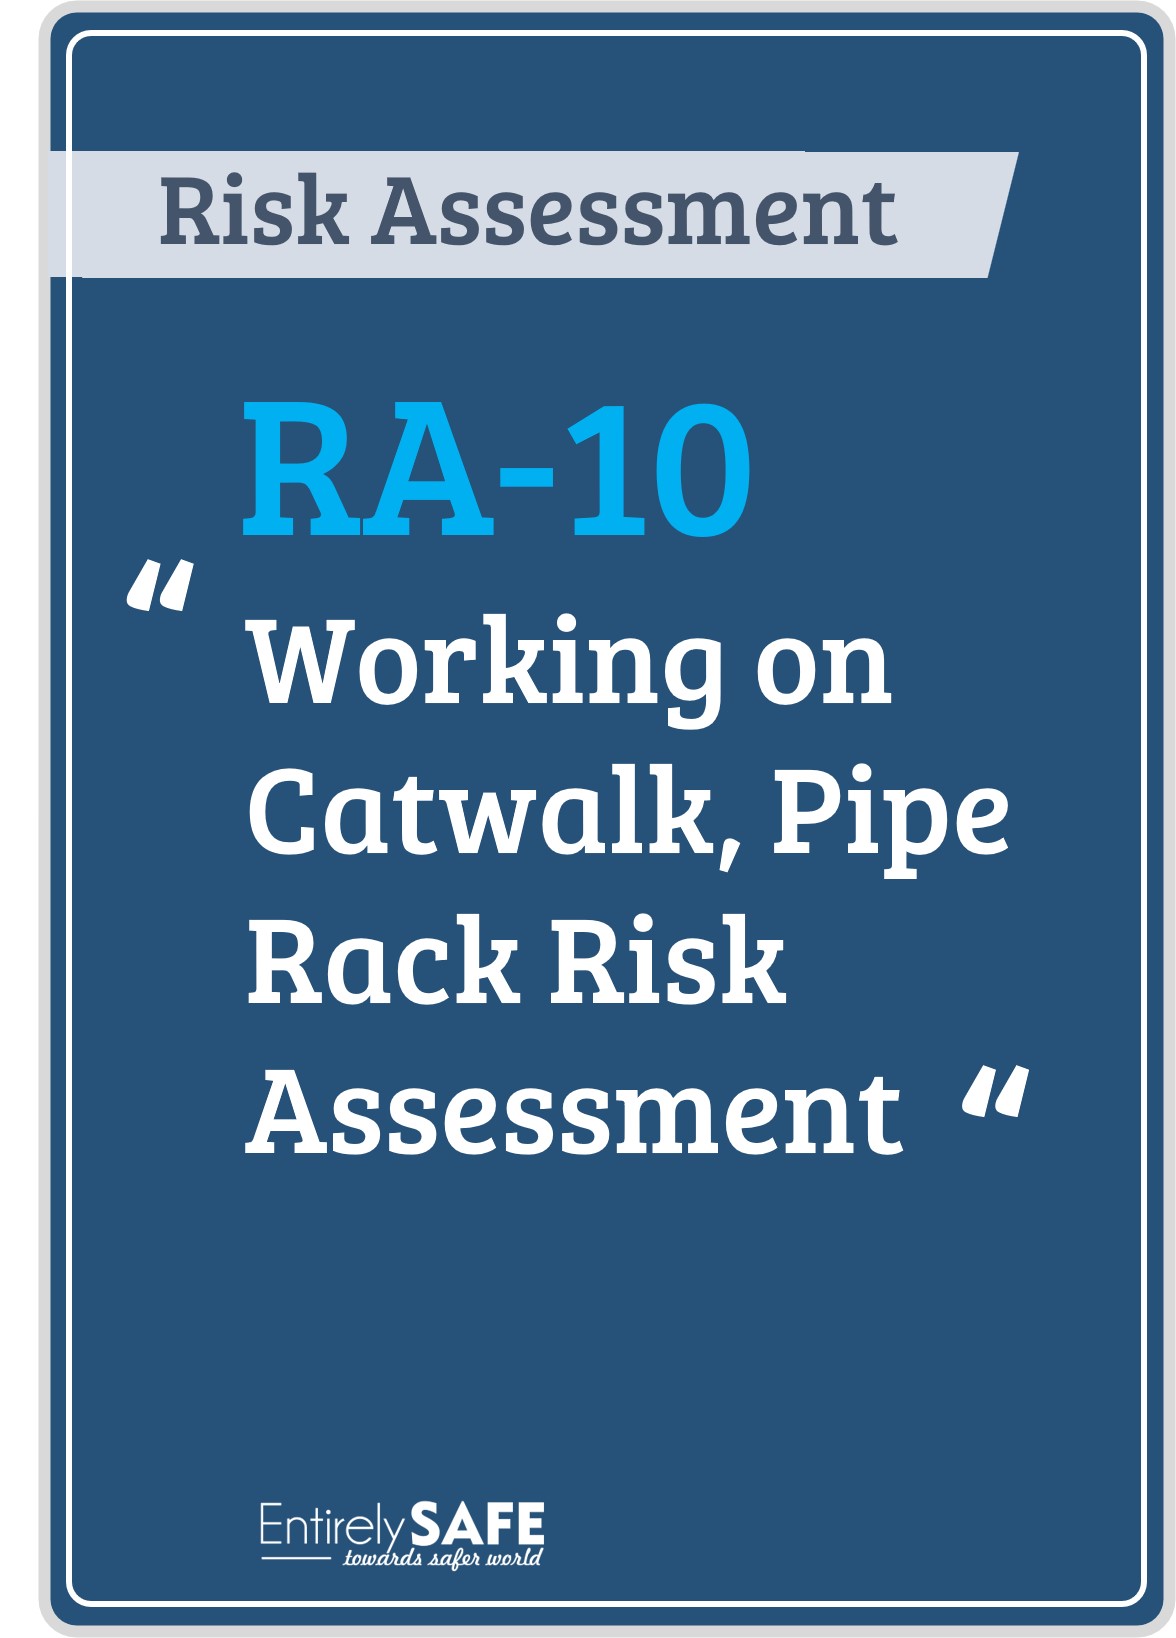 RA-10-Working on the Catwalk, Pipe rack